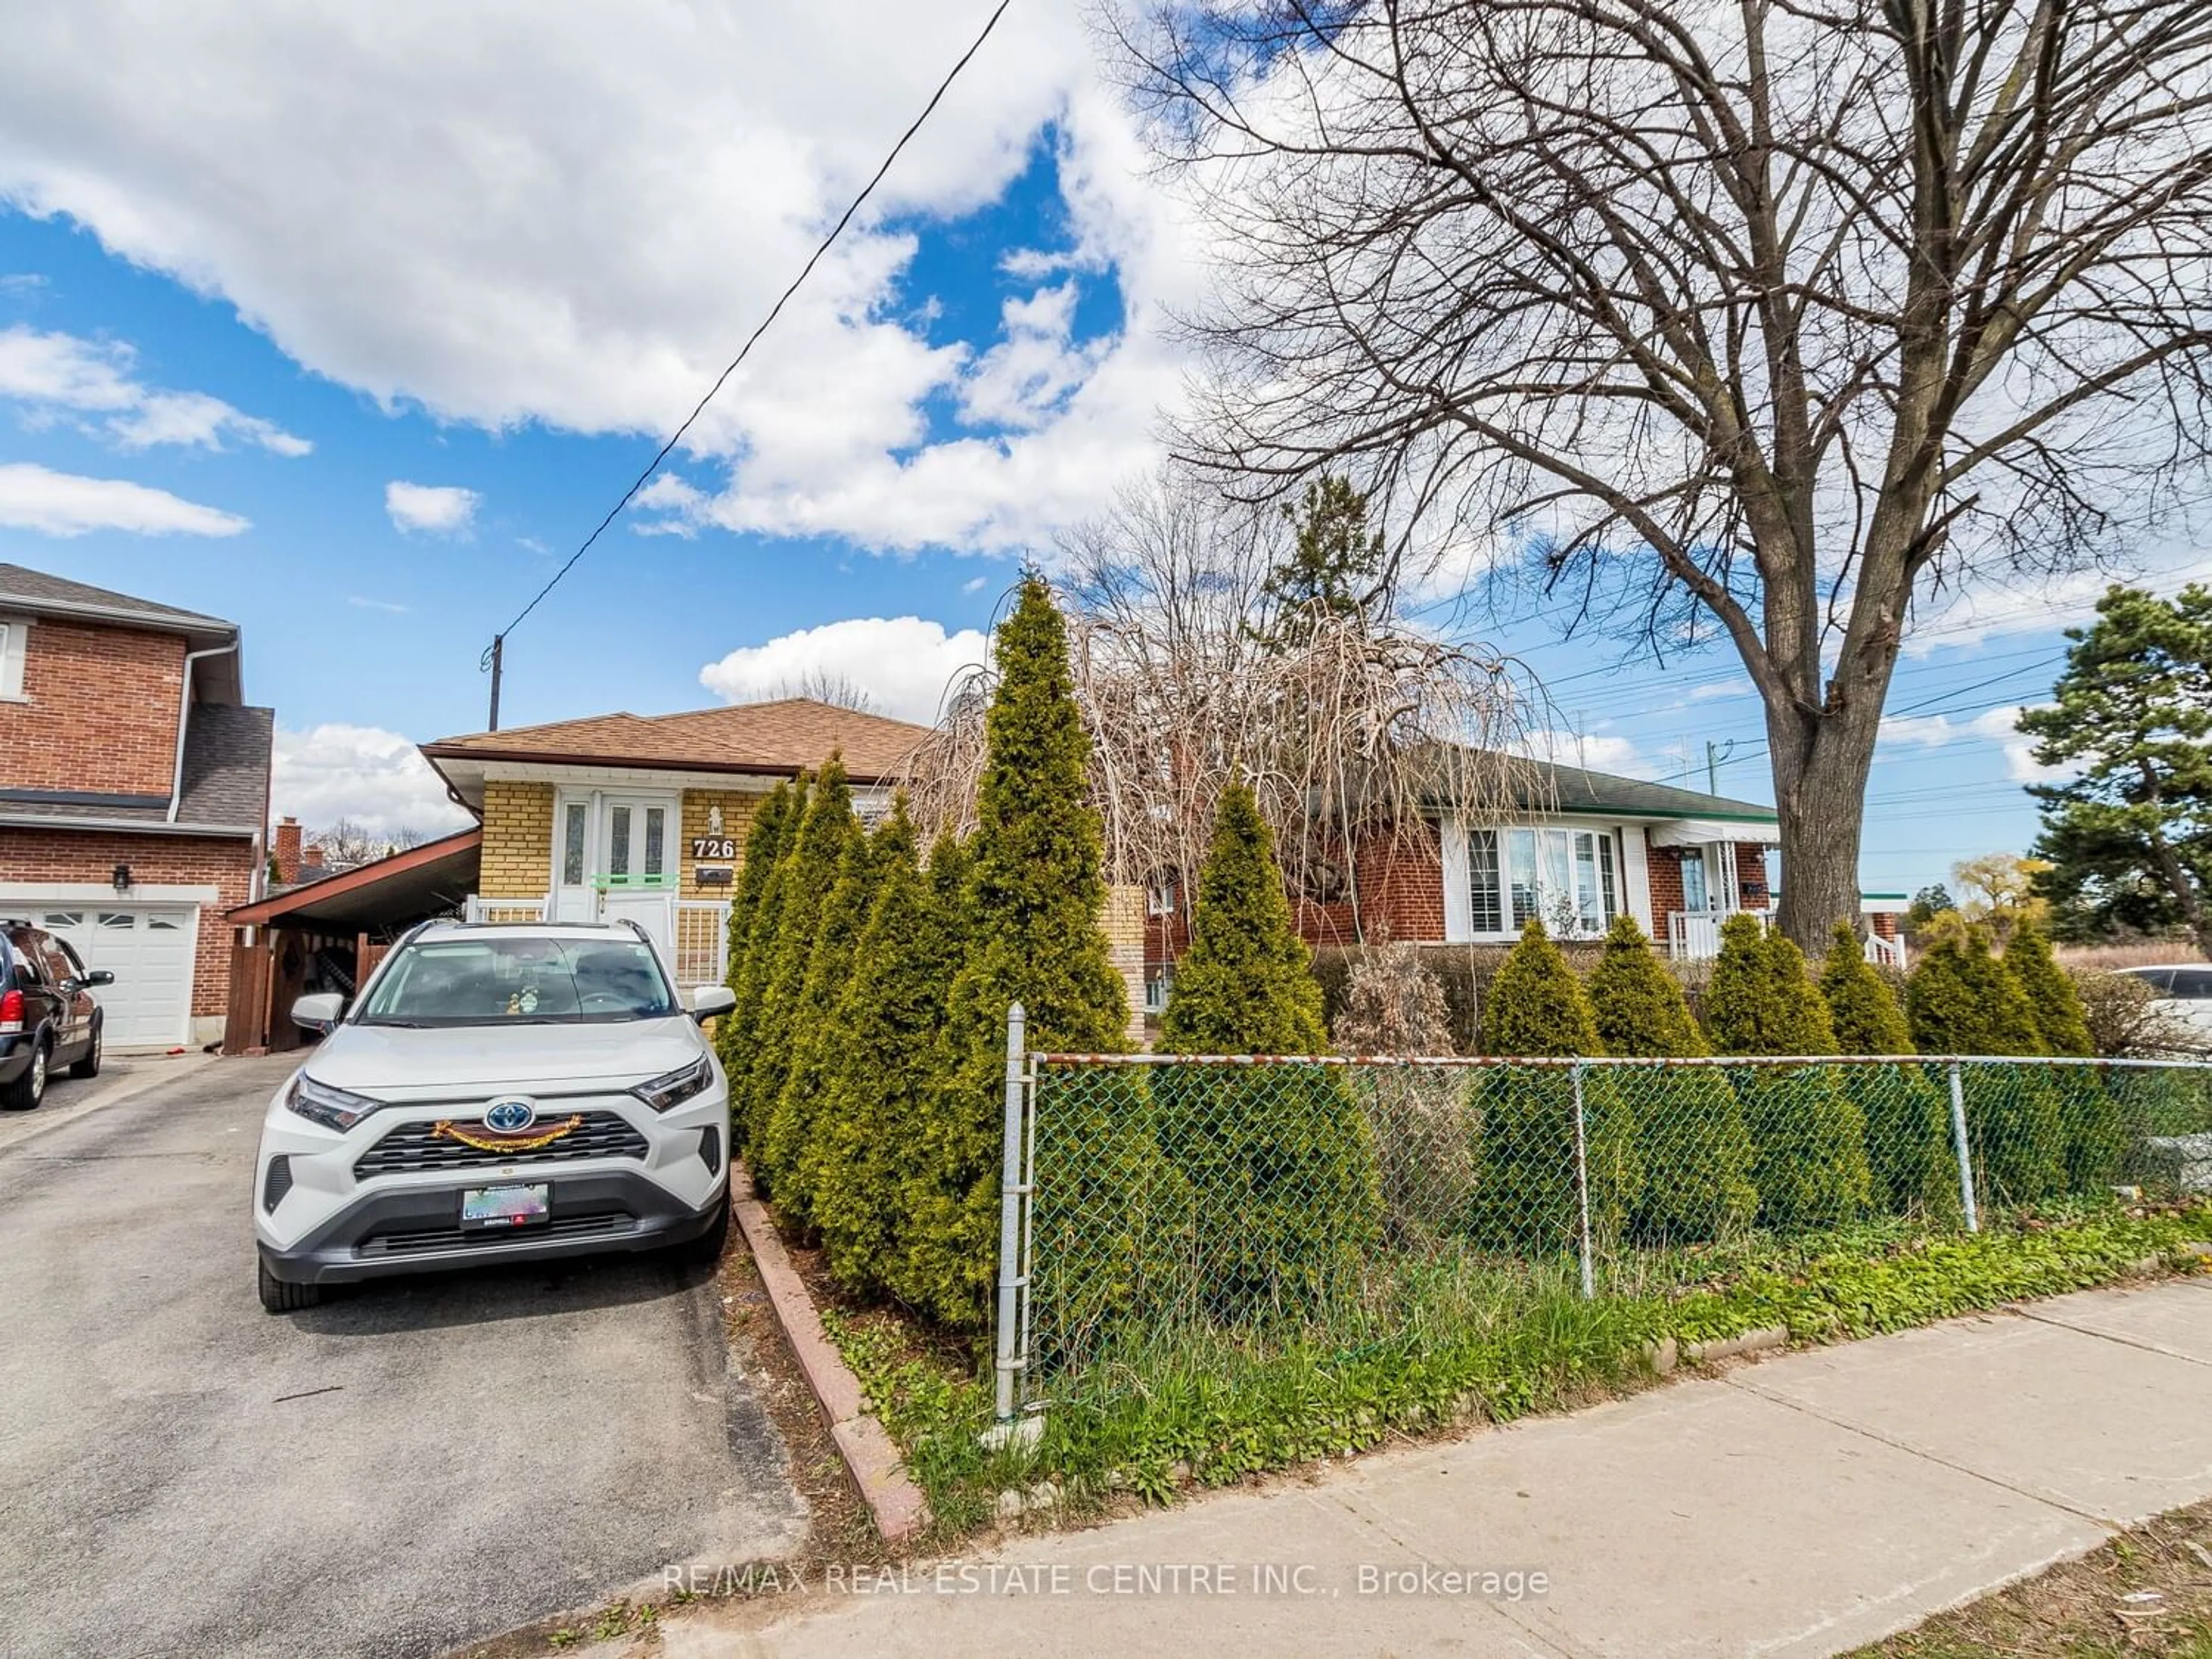 Frontside or backside of a home for 726 Brimorton Dr, Toronto Ontario M1G 2S2